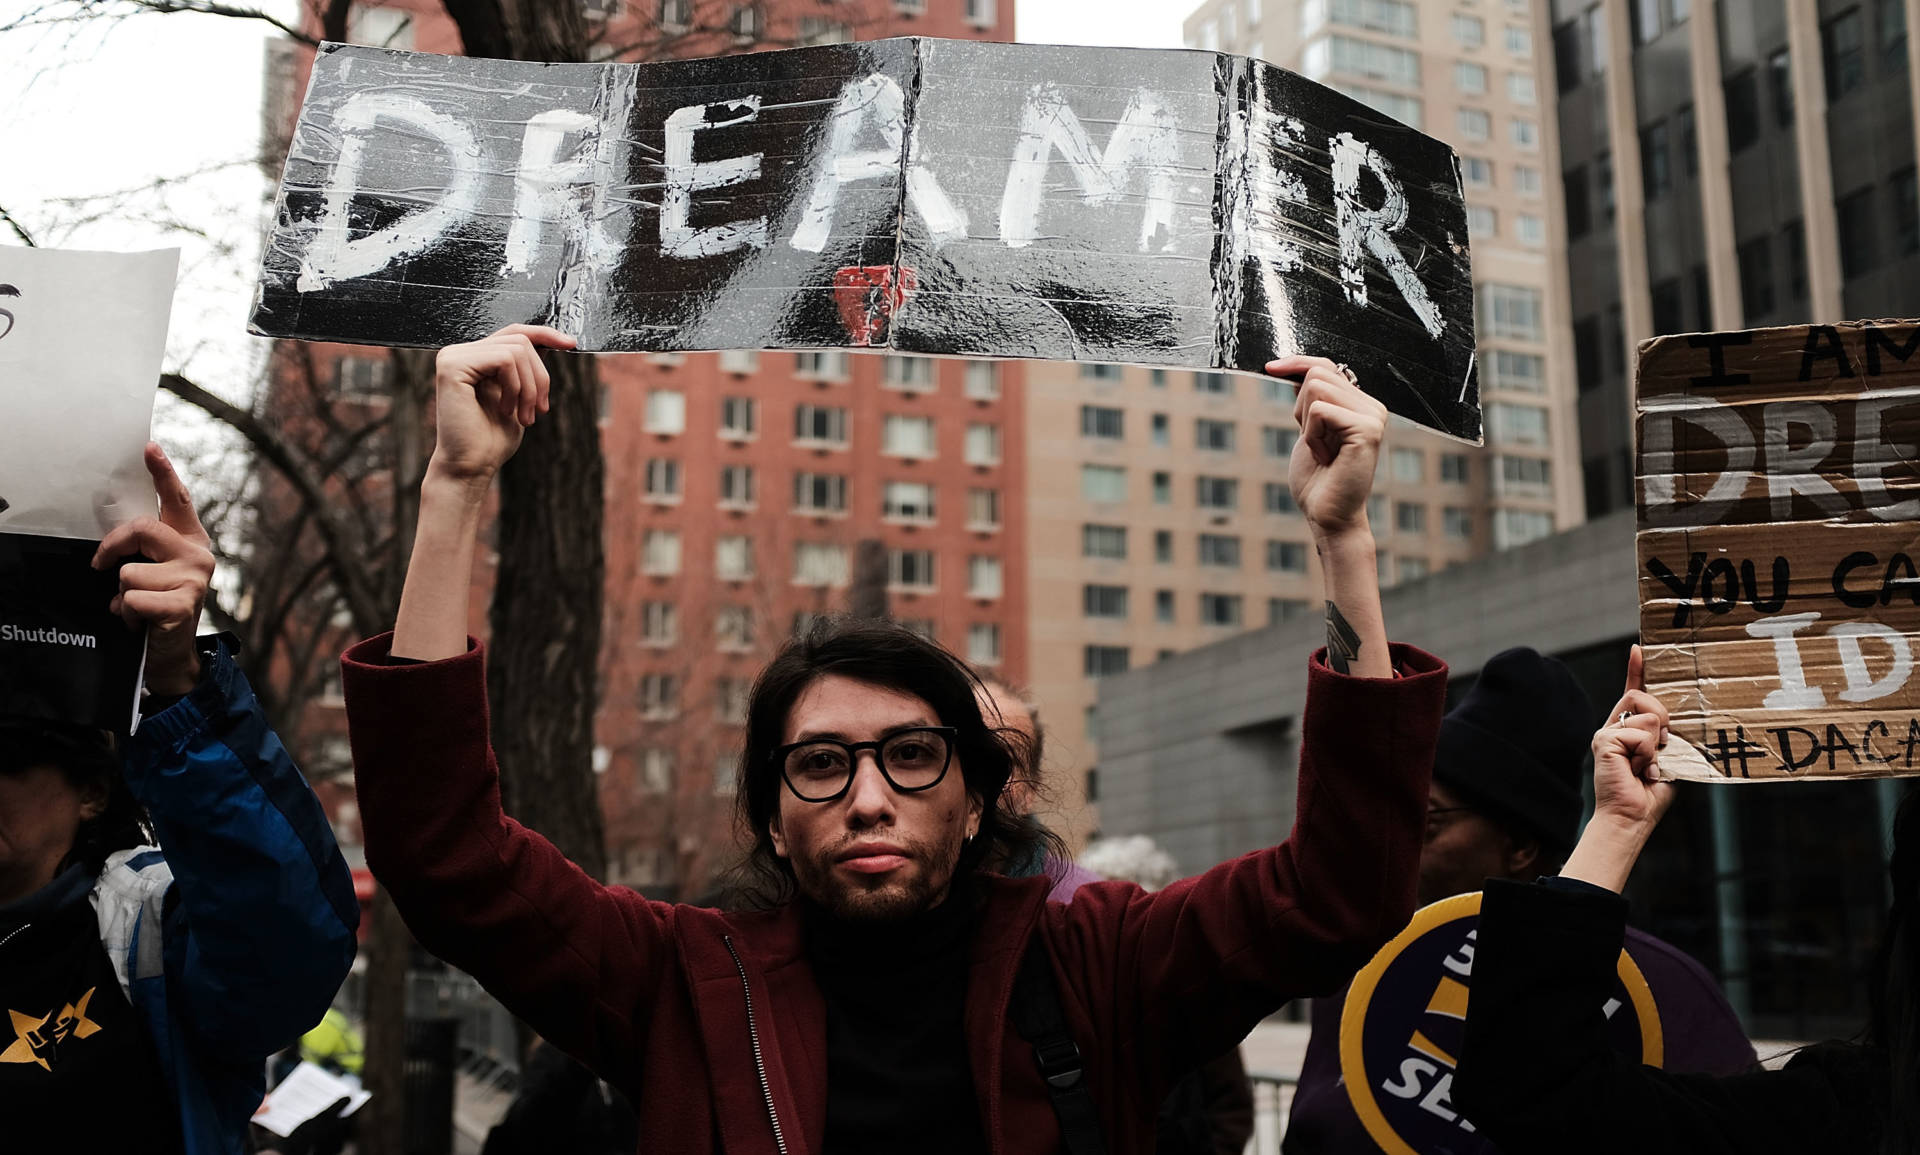 Demonstrators protest the lack of a deal on the Deferred Action for Childhood Arrivals program, which includes so-called DREAMers, last month outside of Federal Plaza in New York City. There is still no deal. Spencer Platt/Getty Images